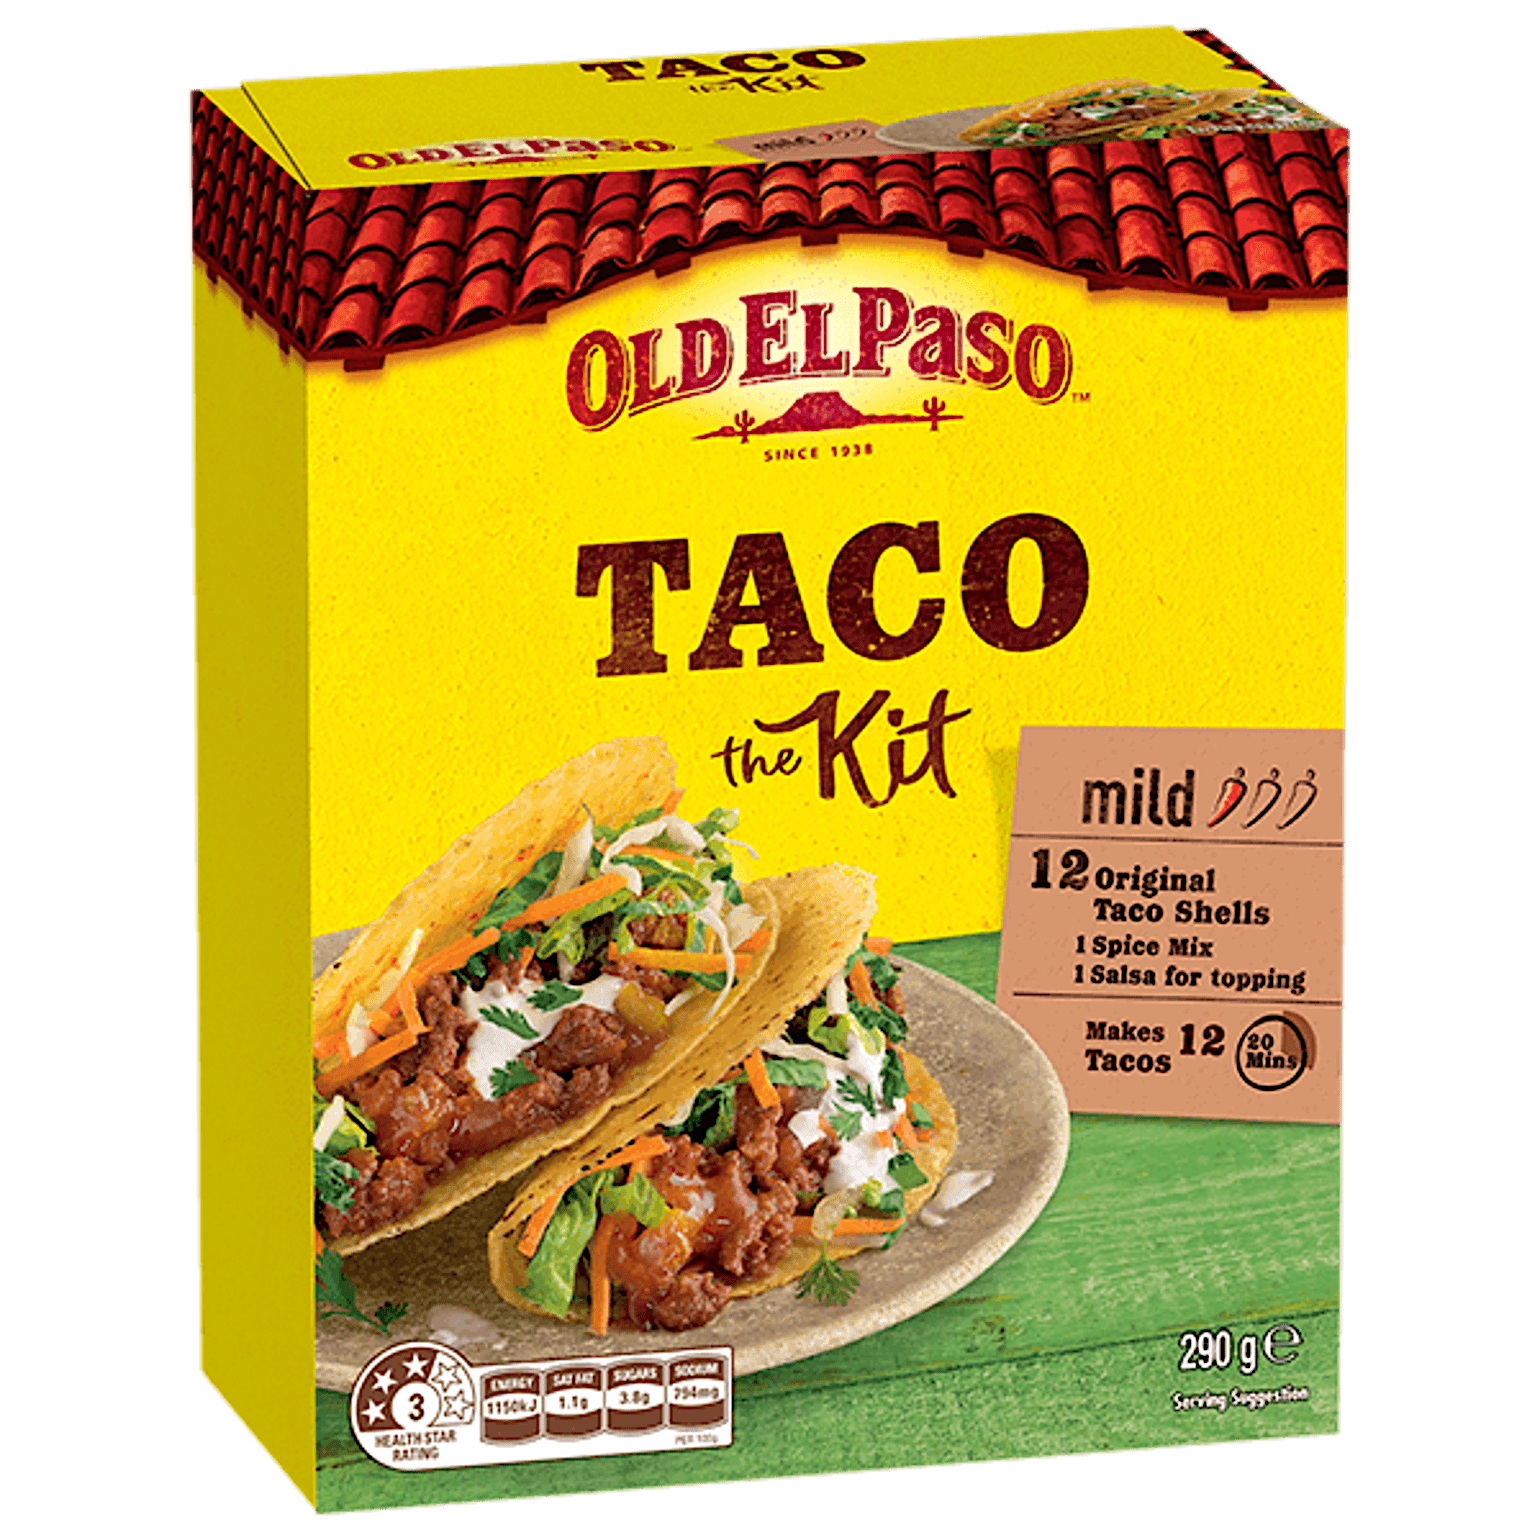 a pack of Old El Paso's mild taco kit containing taco shells, spice mix & salsa for topping (290g)